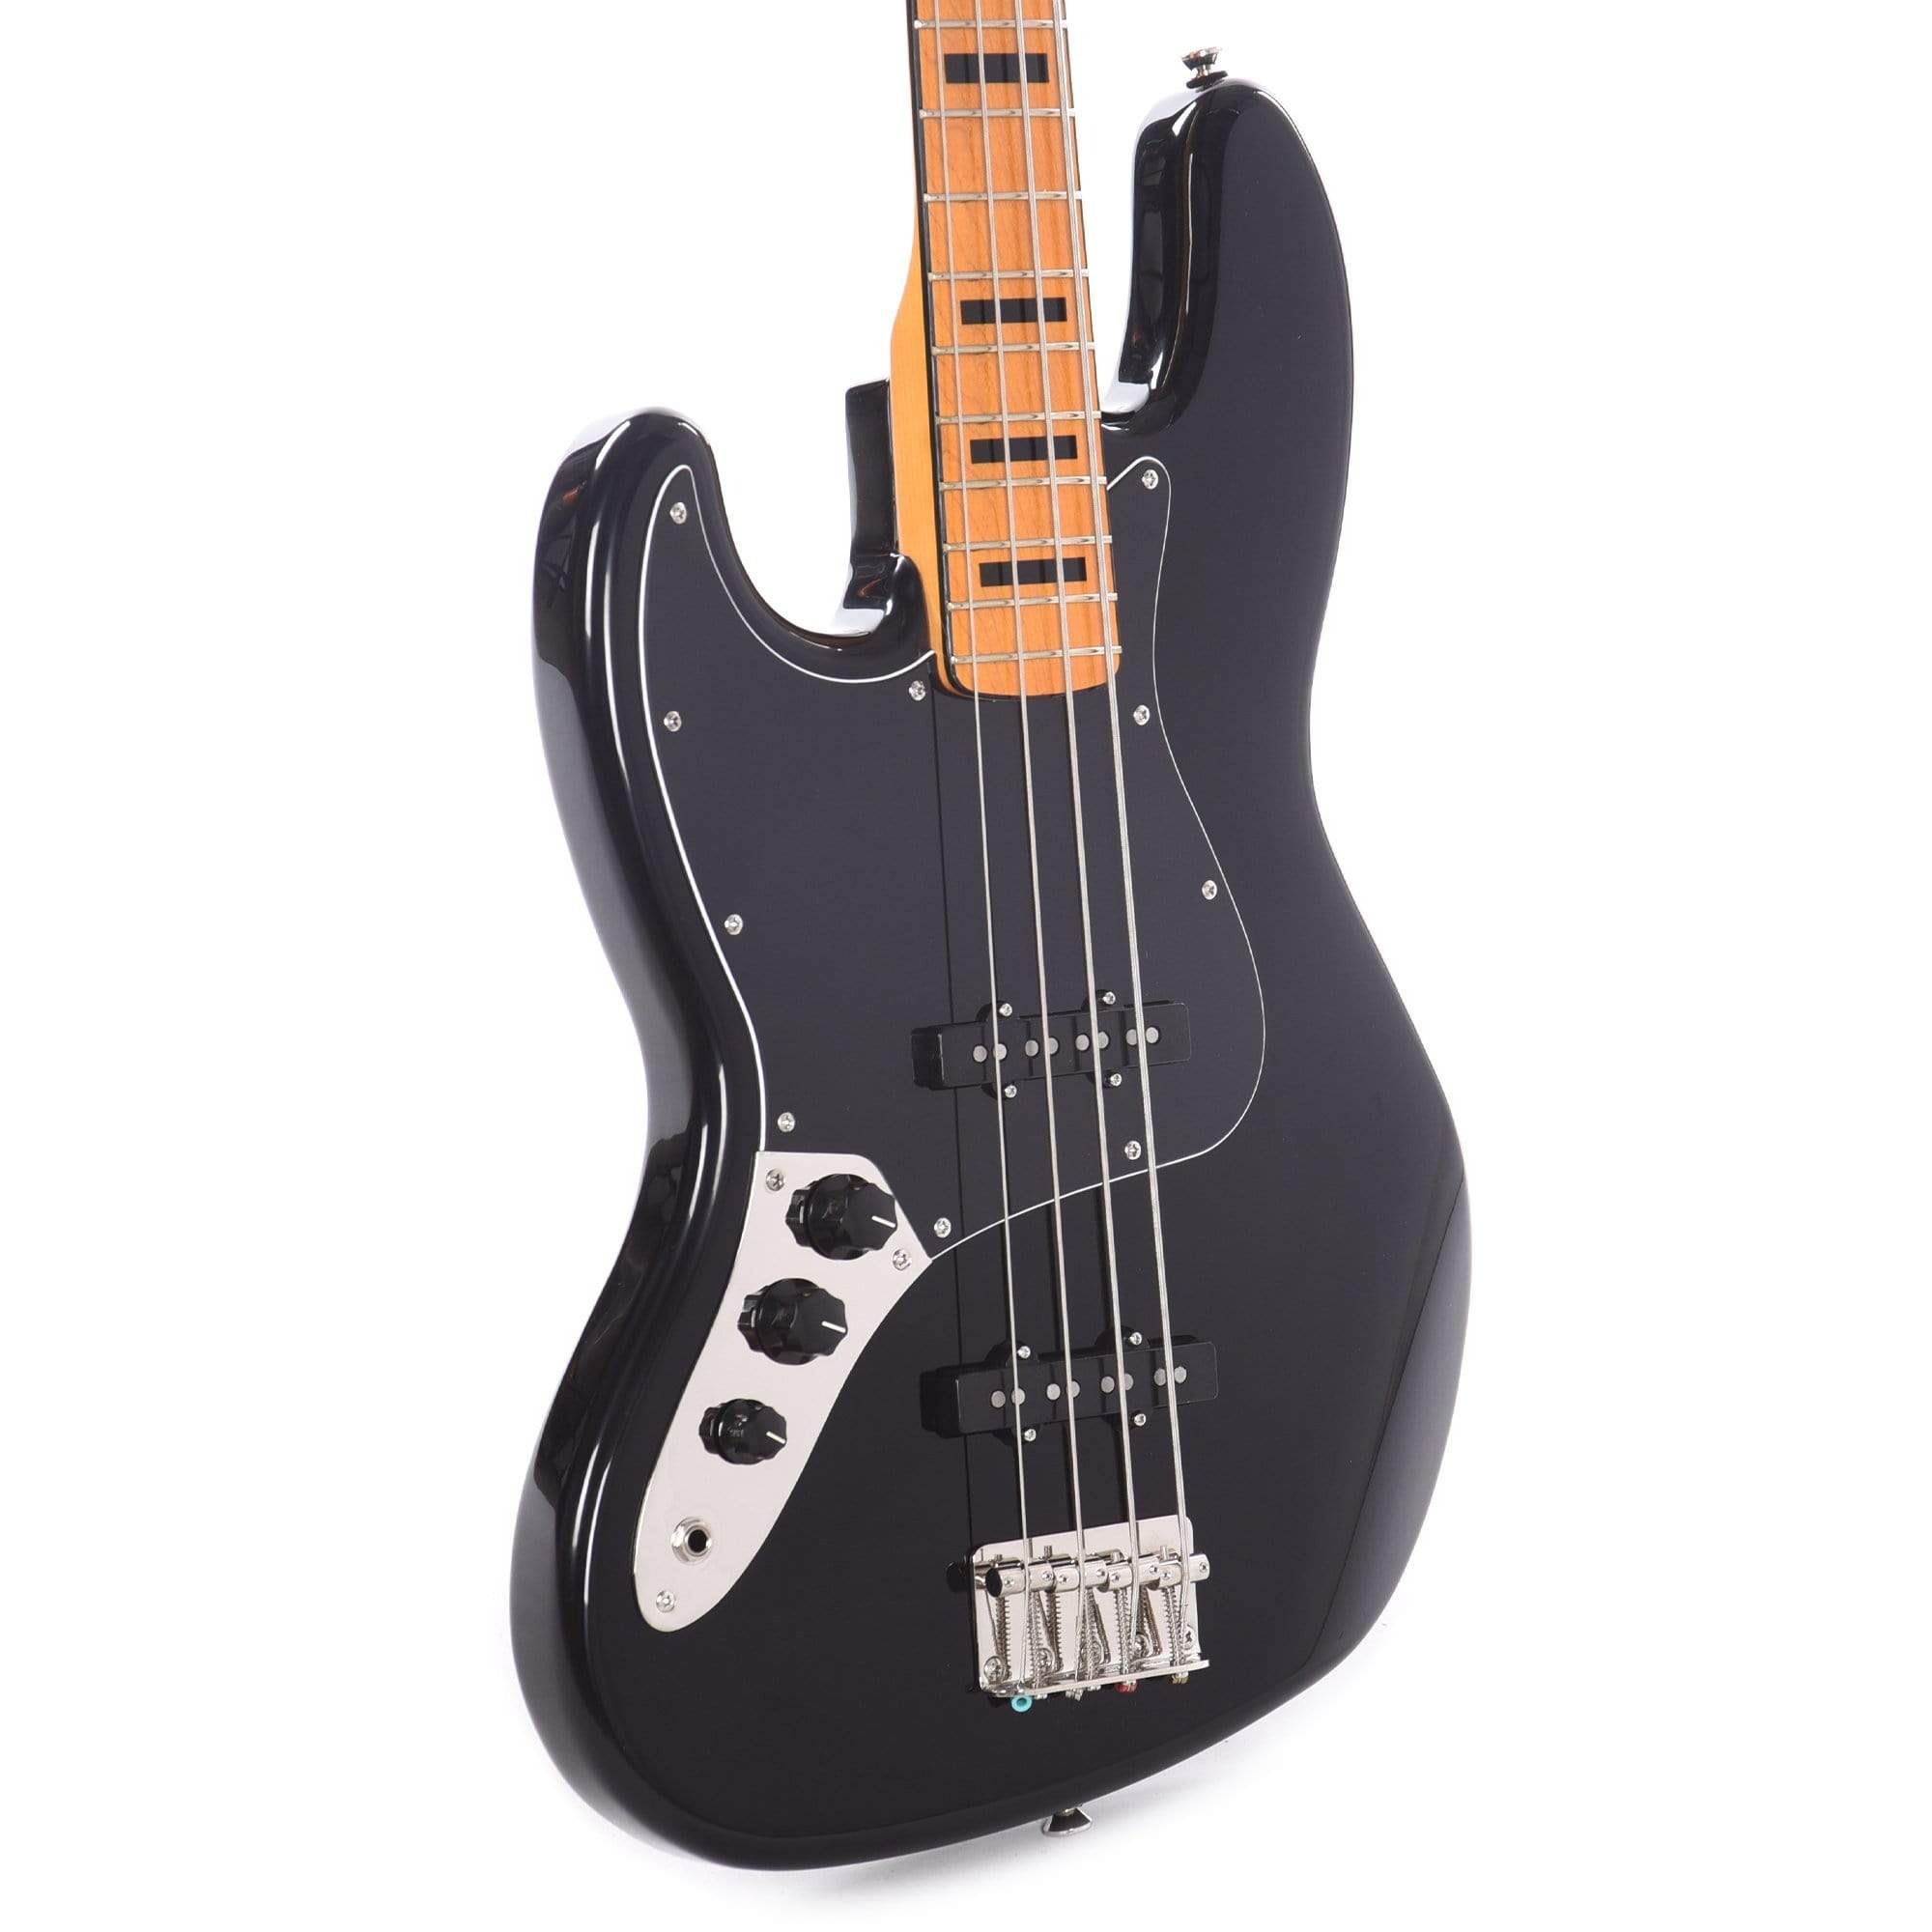 Squier Classic Vibe 70s Jazz Bass Lefty Black Bass Guitars / Left-Handed